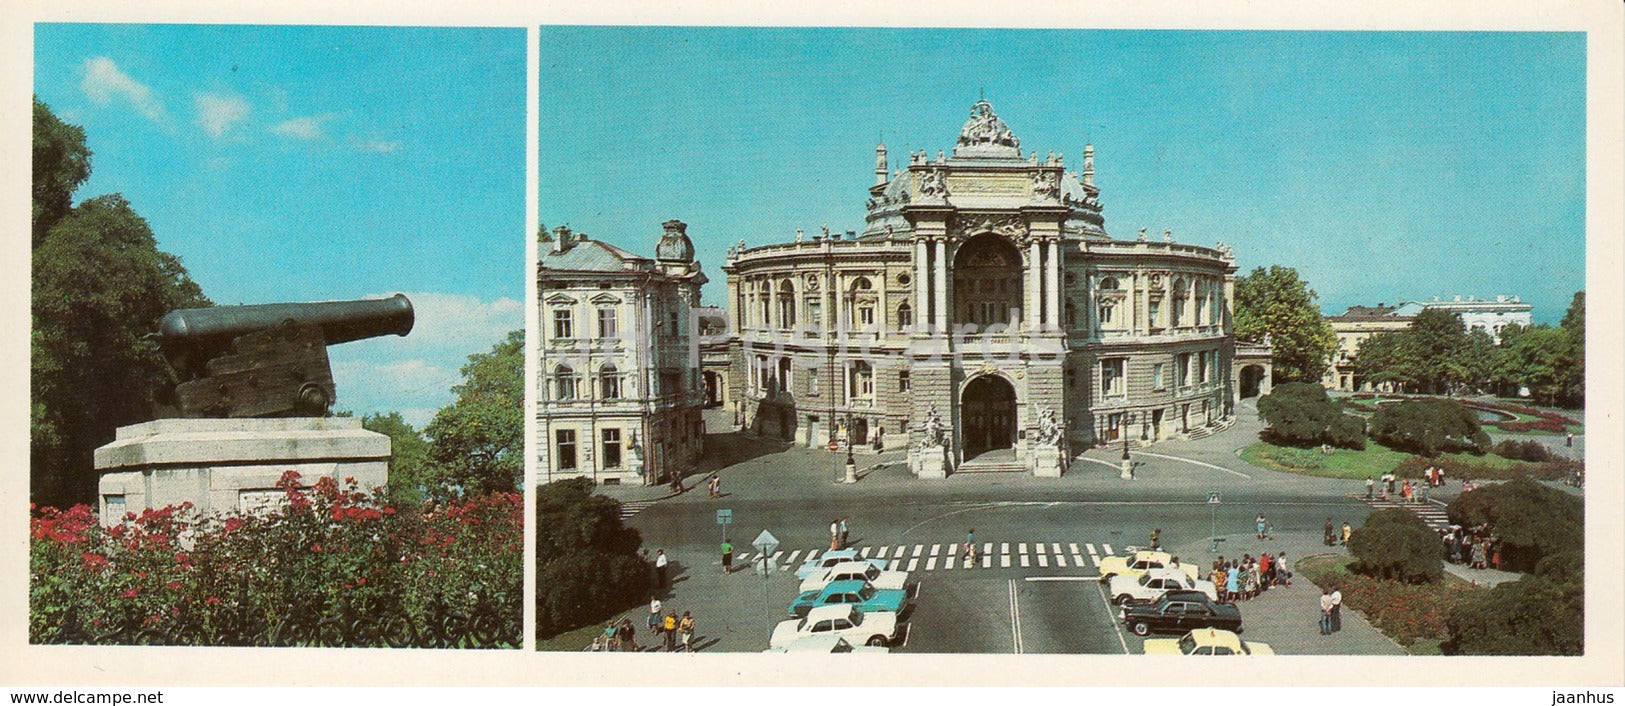 Odessa - Cannon from English frigate Tiger - Opera and Ballet Theatre - 1985 - Ukraine USSR - unused - JH Postcards